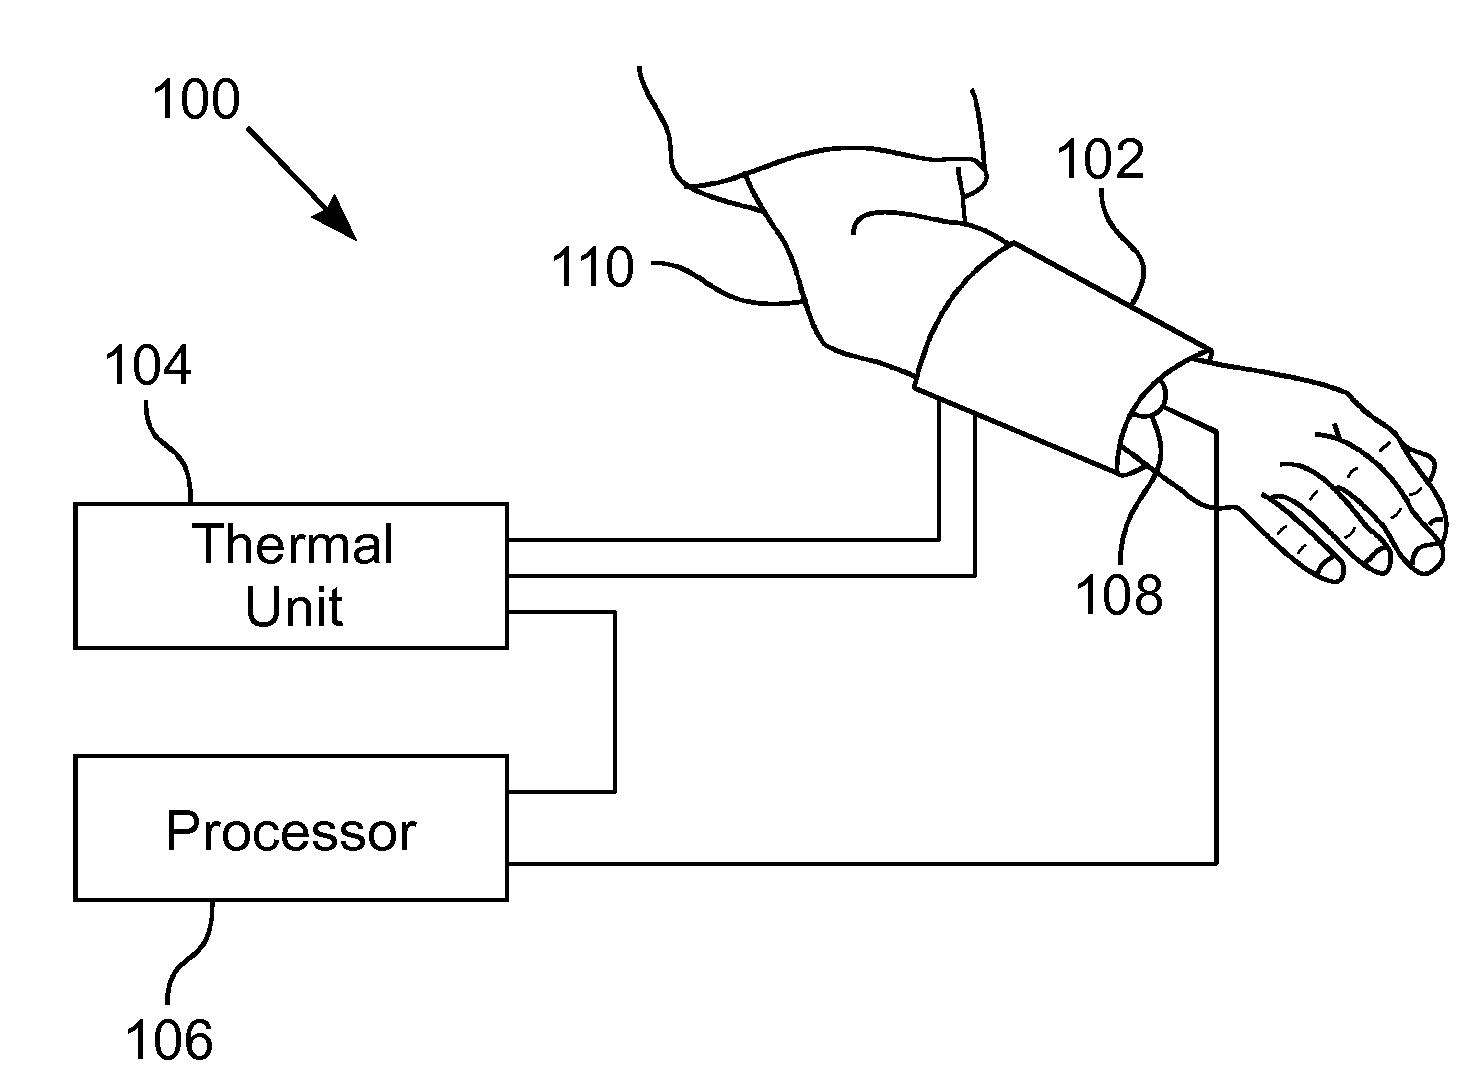 Diagnosis and treatment methods relating to application of external heat